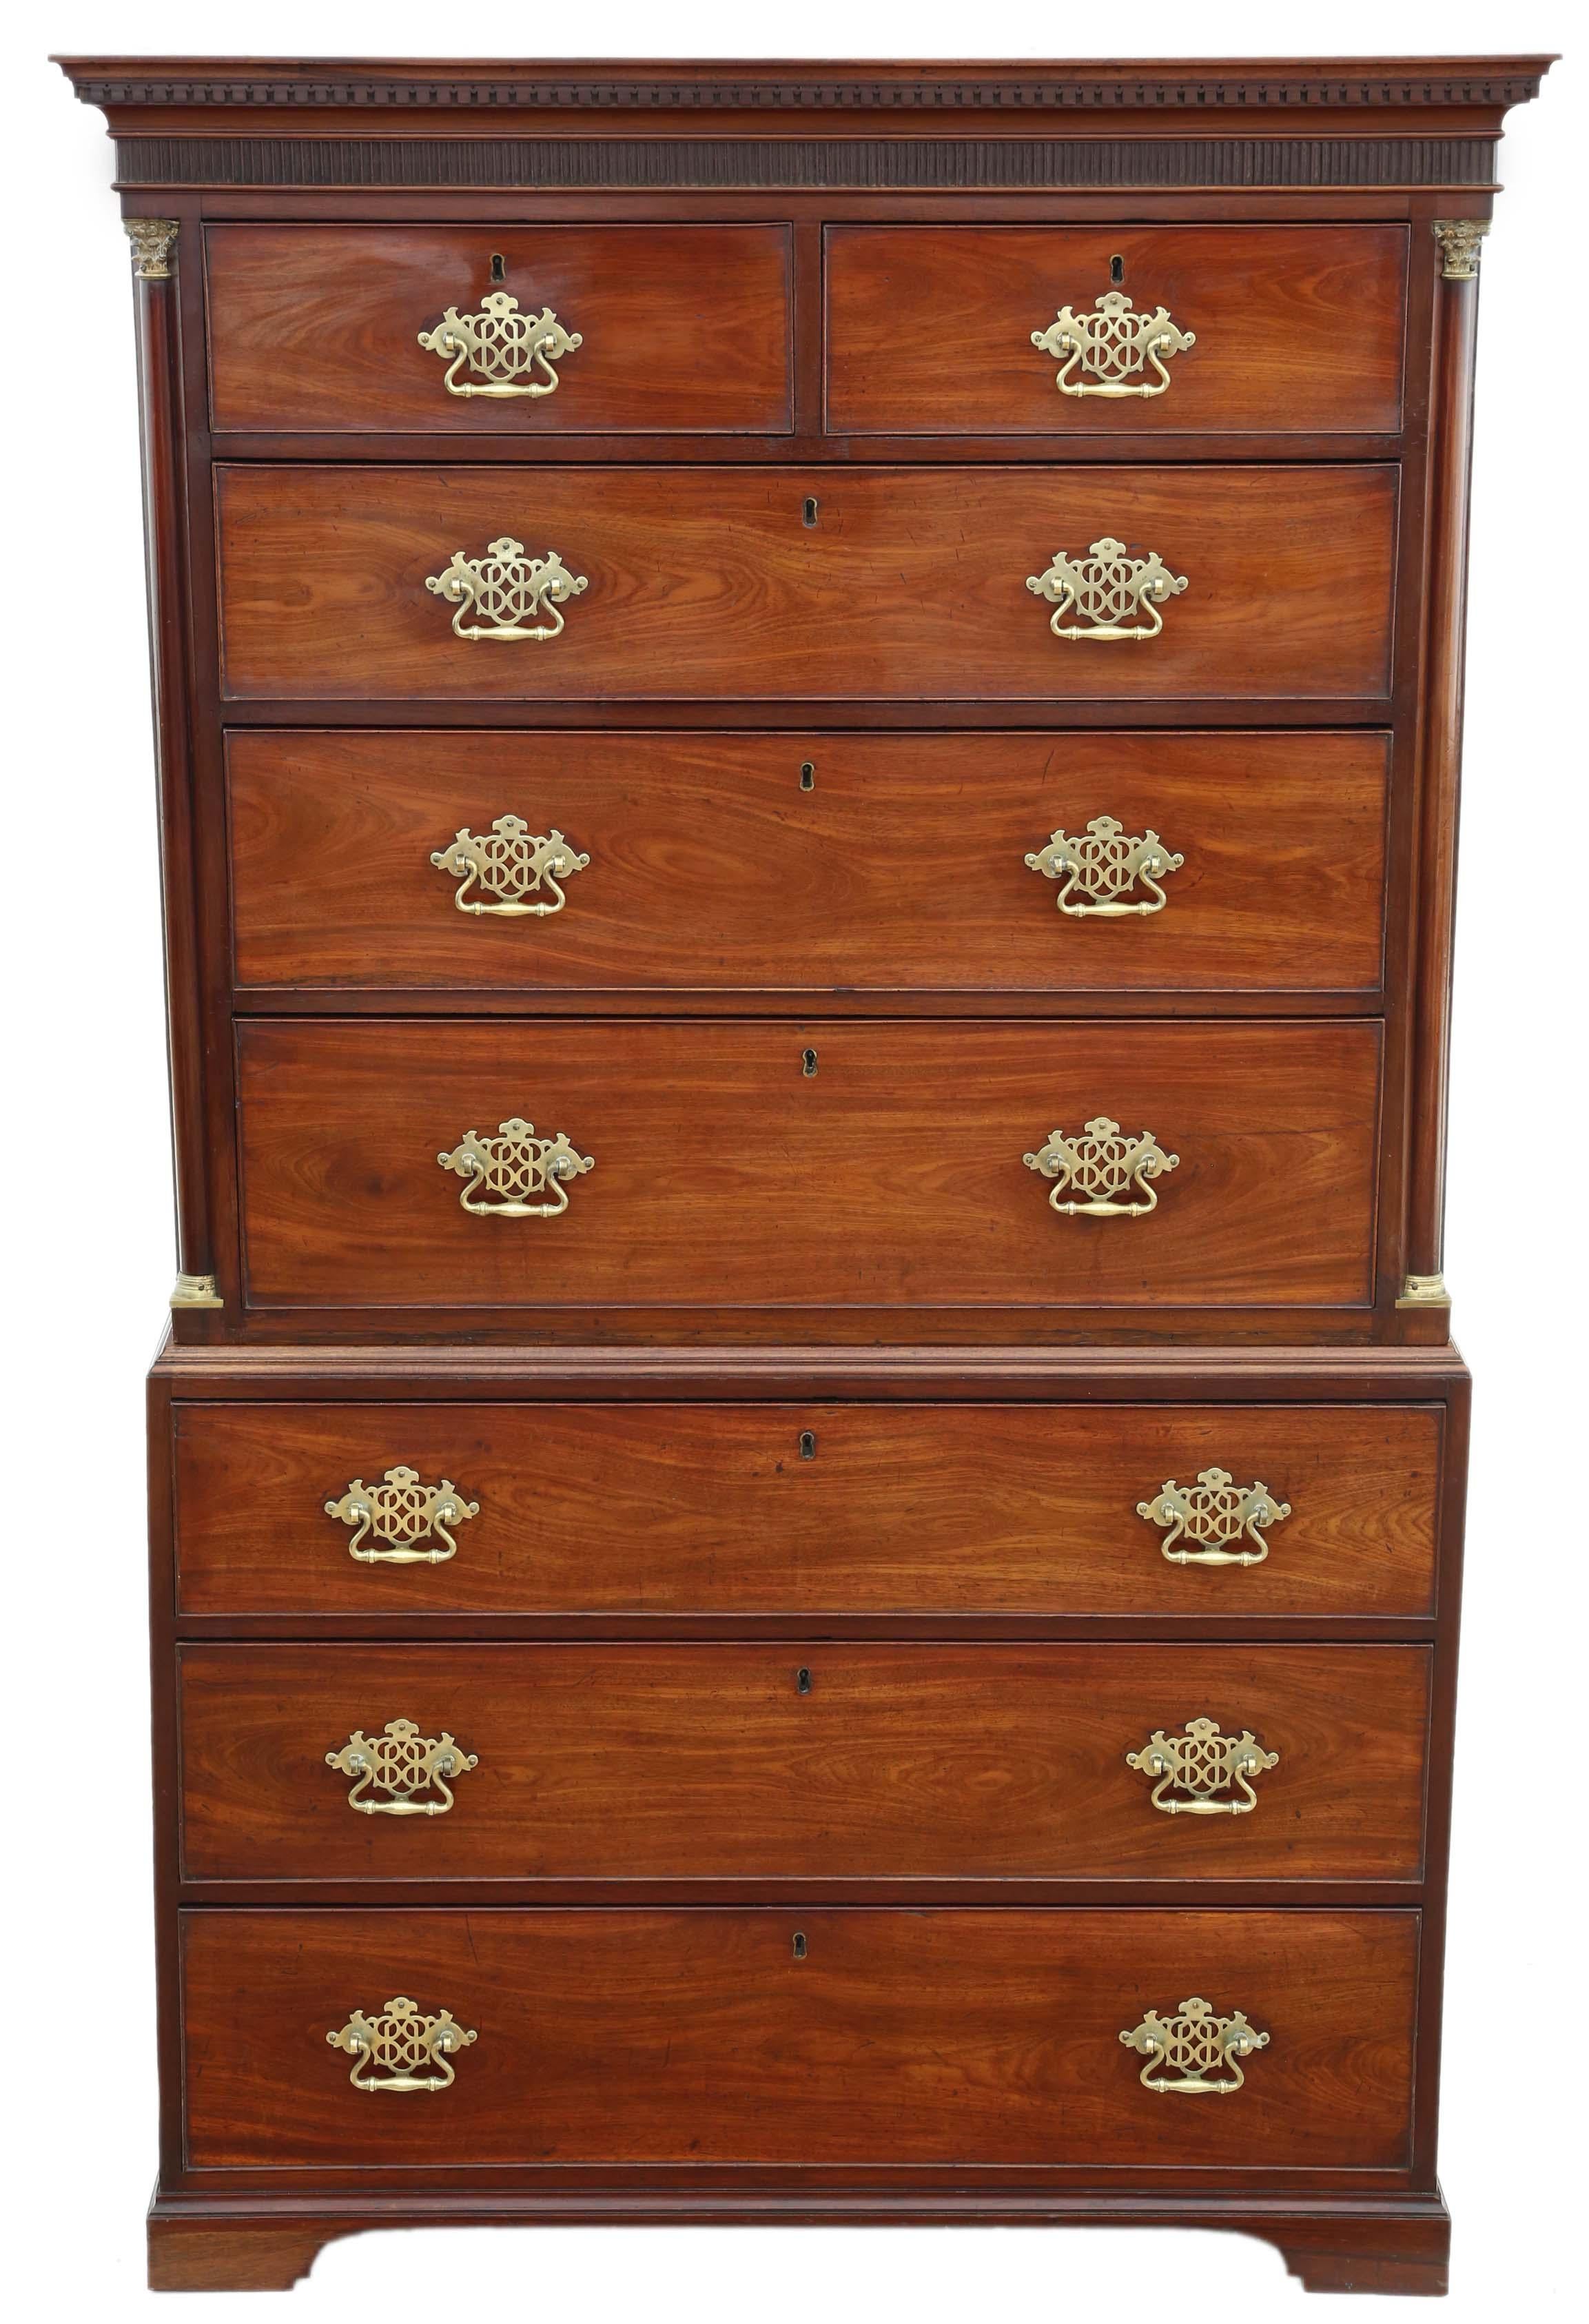 Antique fine quality Georgian mahogany tallboy chest on chest of drawers. Made in the early 19th century, circa 1800.
Attractive ormolu-mounted pilasters. Much better than most.

Solid, strong and very heavy, separates into two halves for